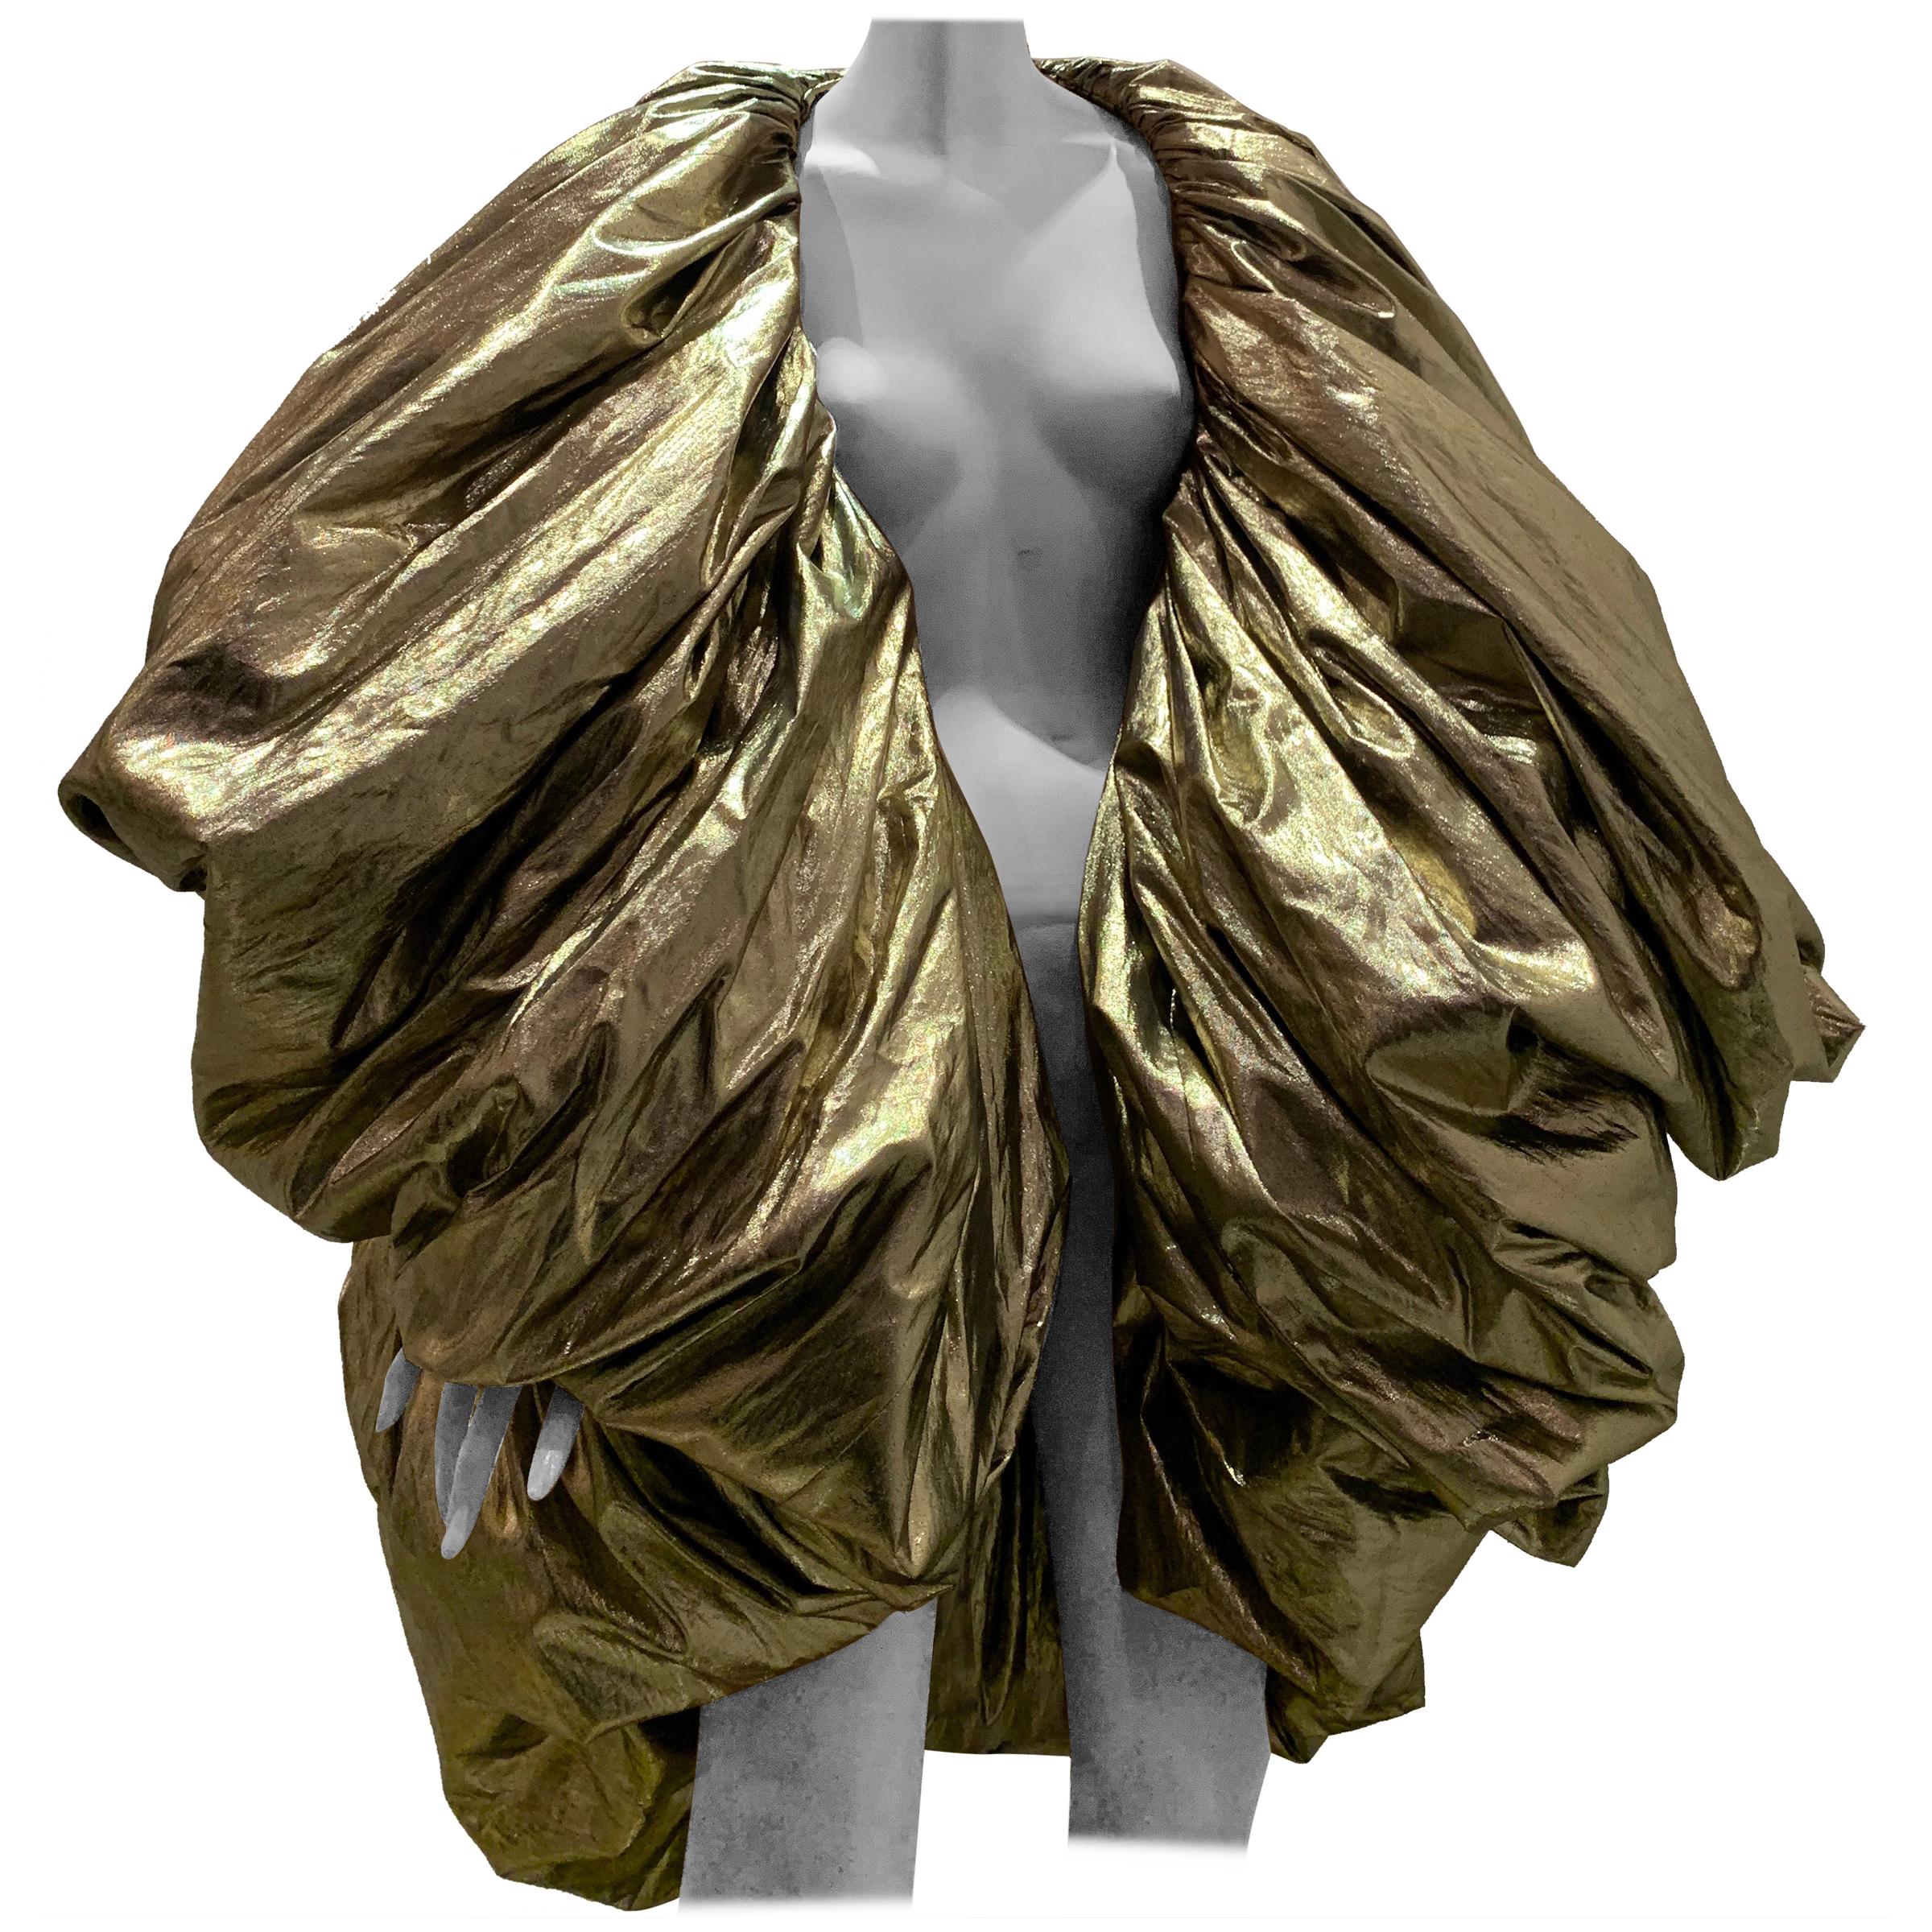 Torso Creations Over Sized Gold Lame Balloon Cocoon Cape Coat